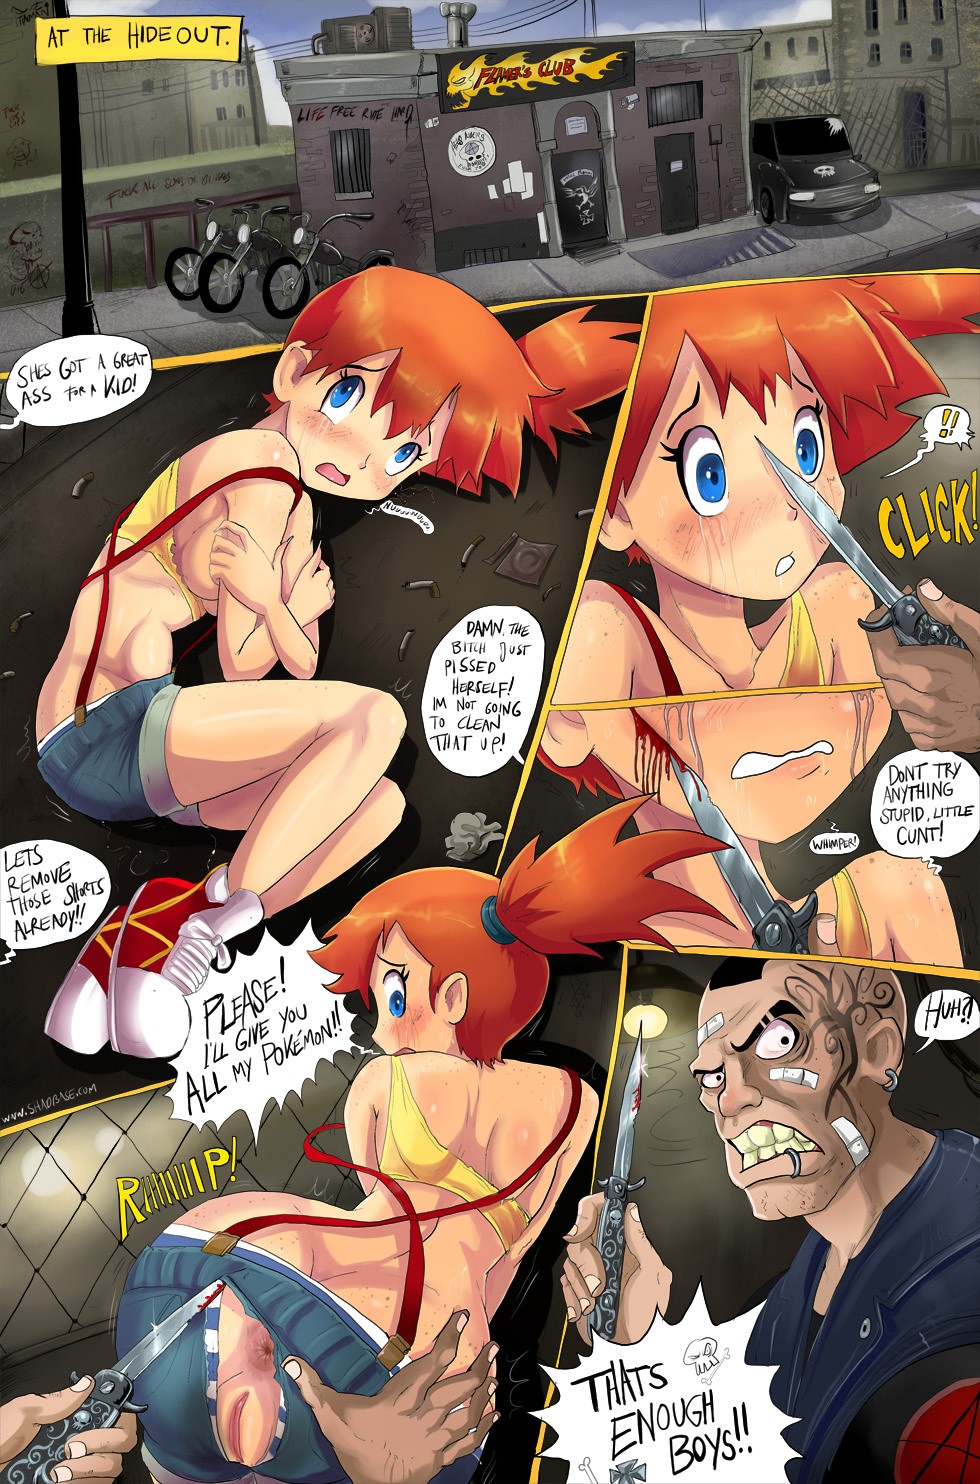 Misty Gets Wet hentai manga picture 5